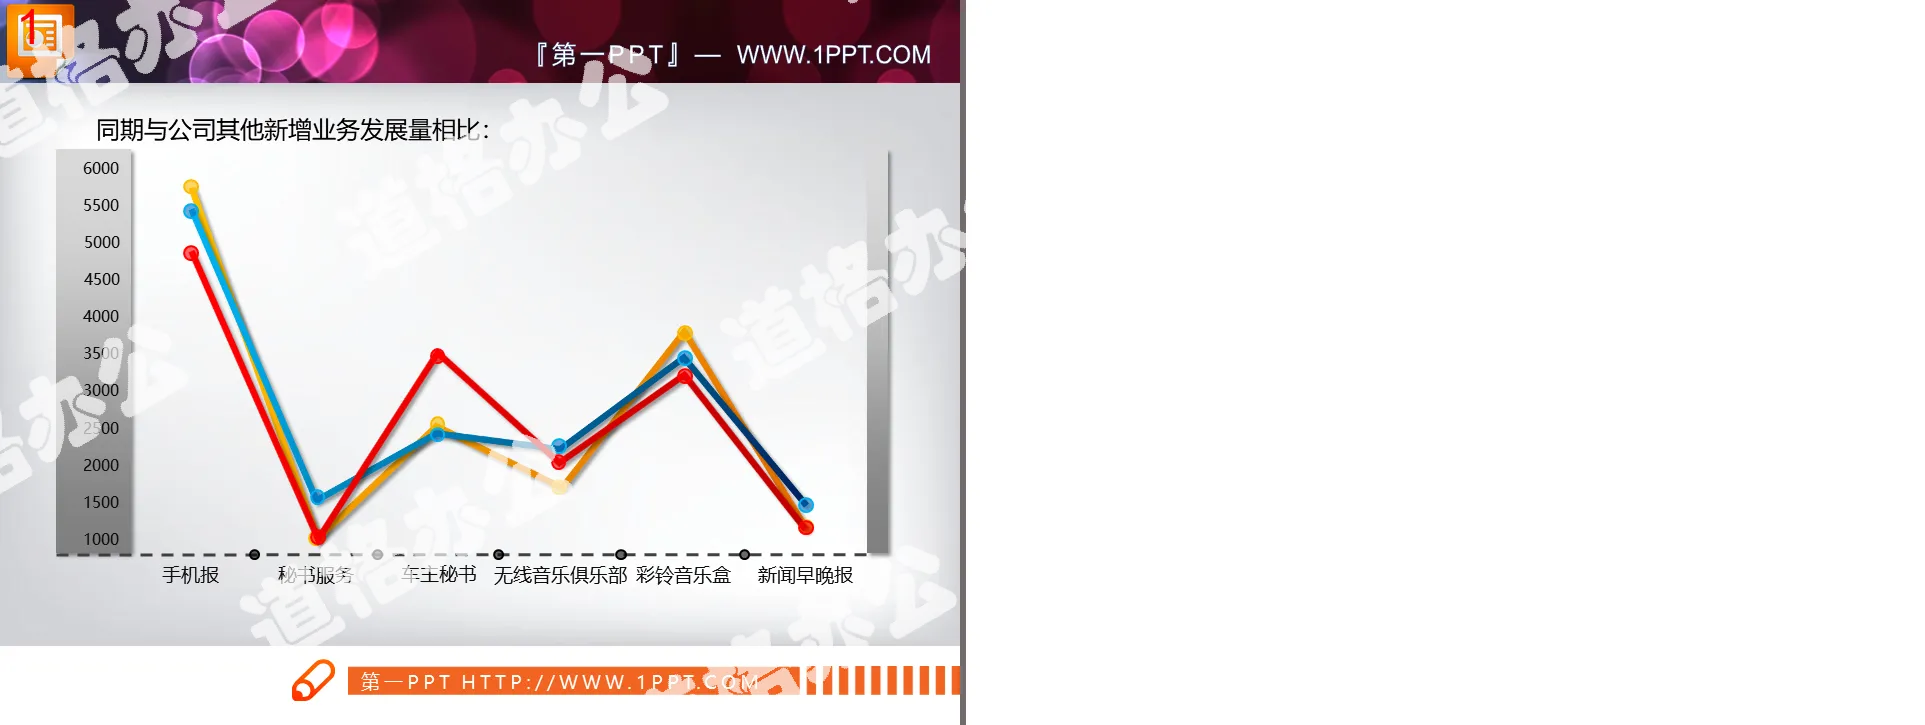 Dynamic display of PPT line chart